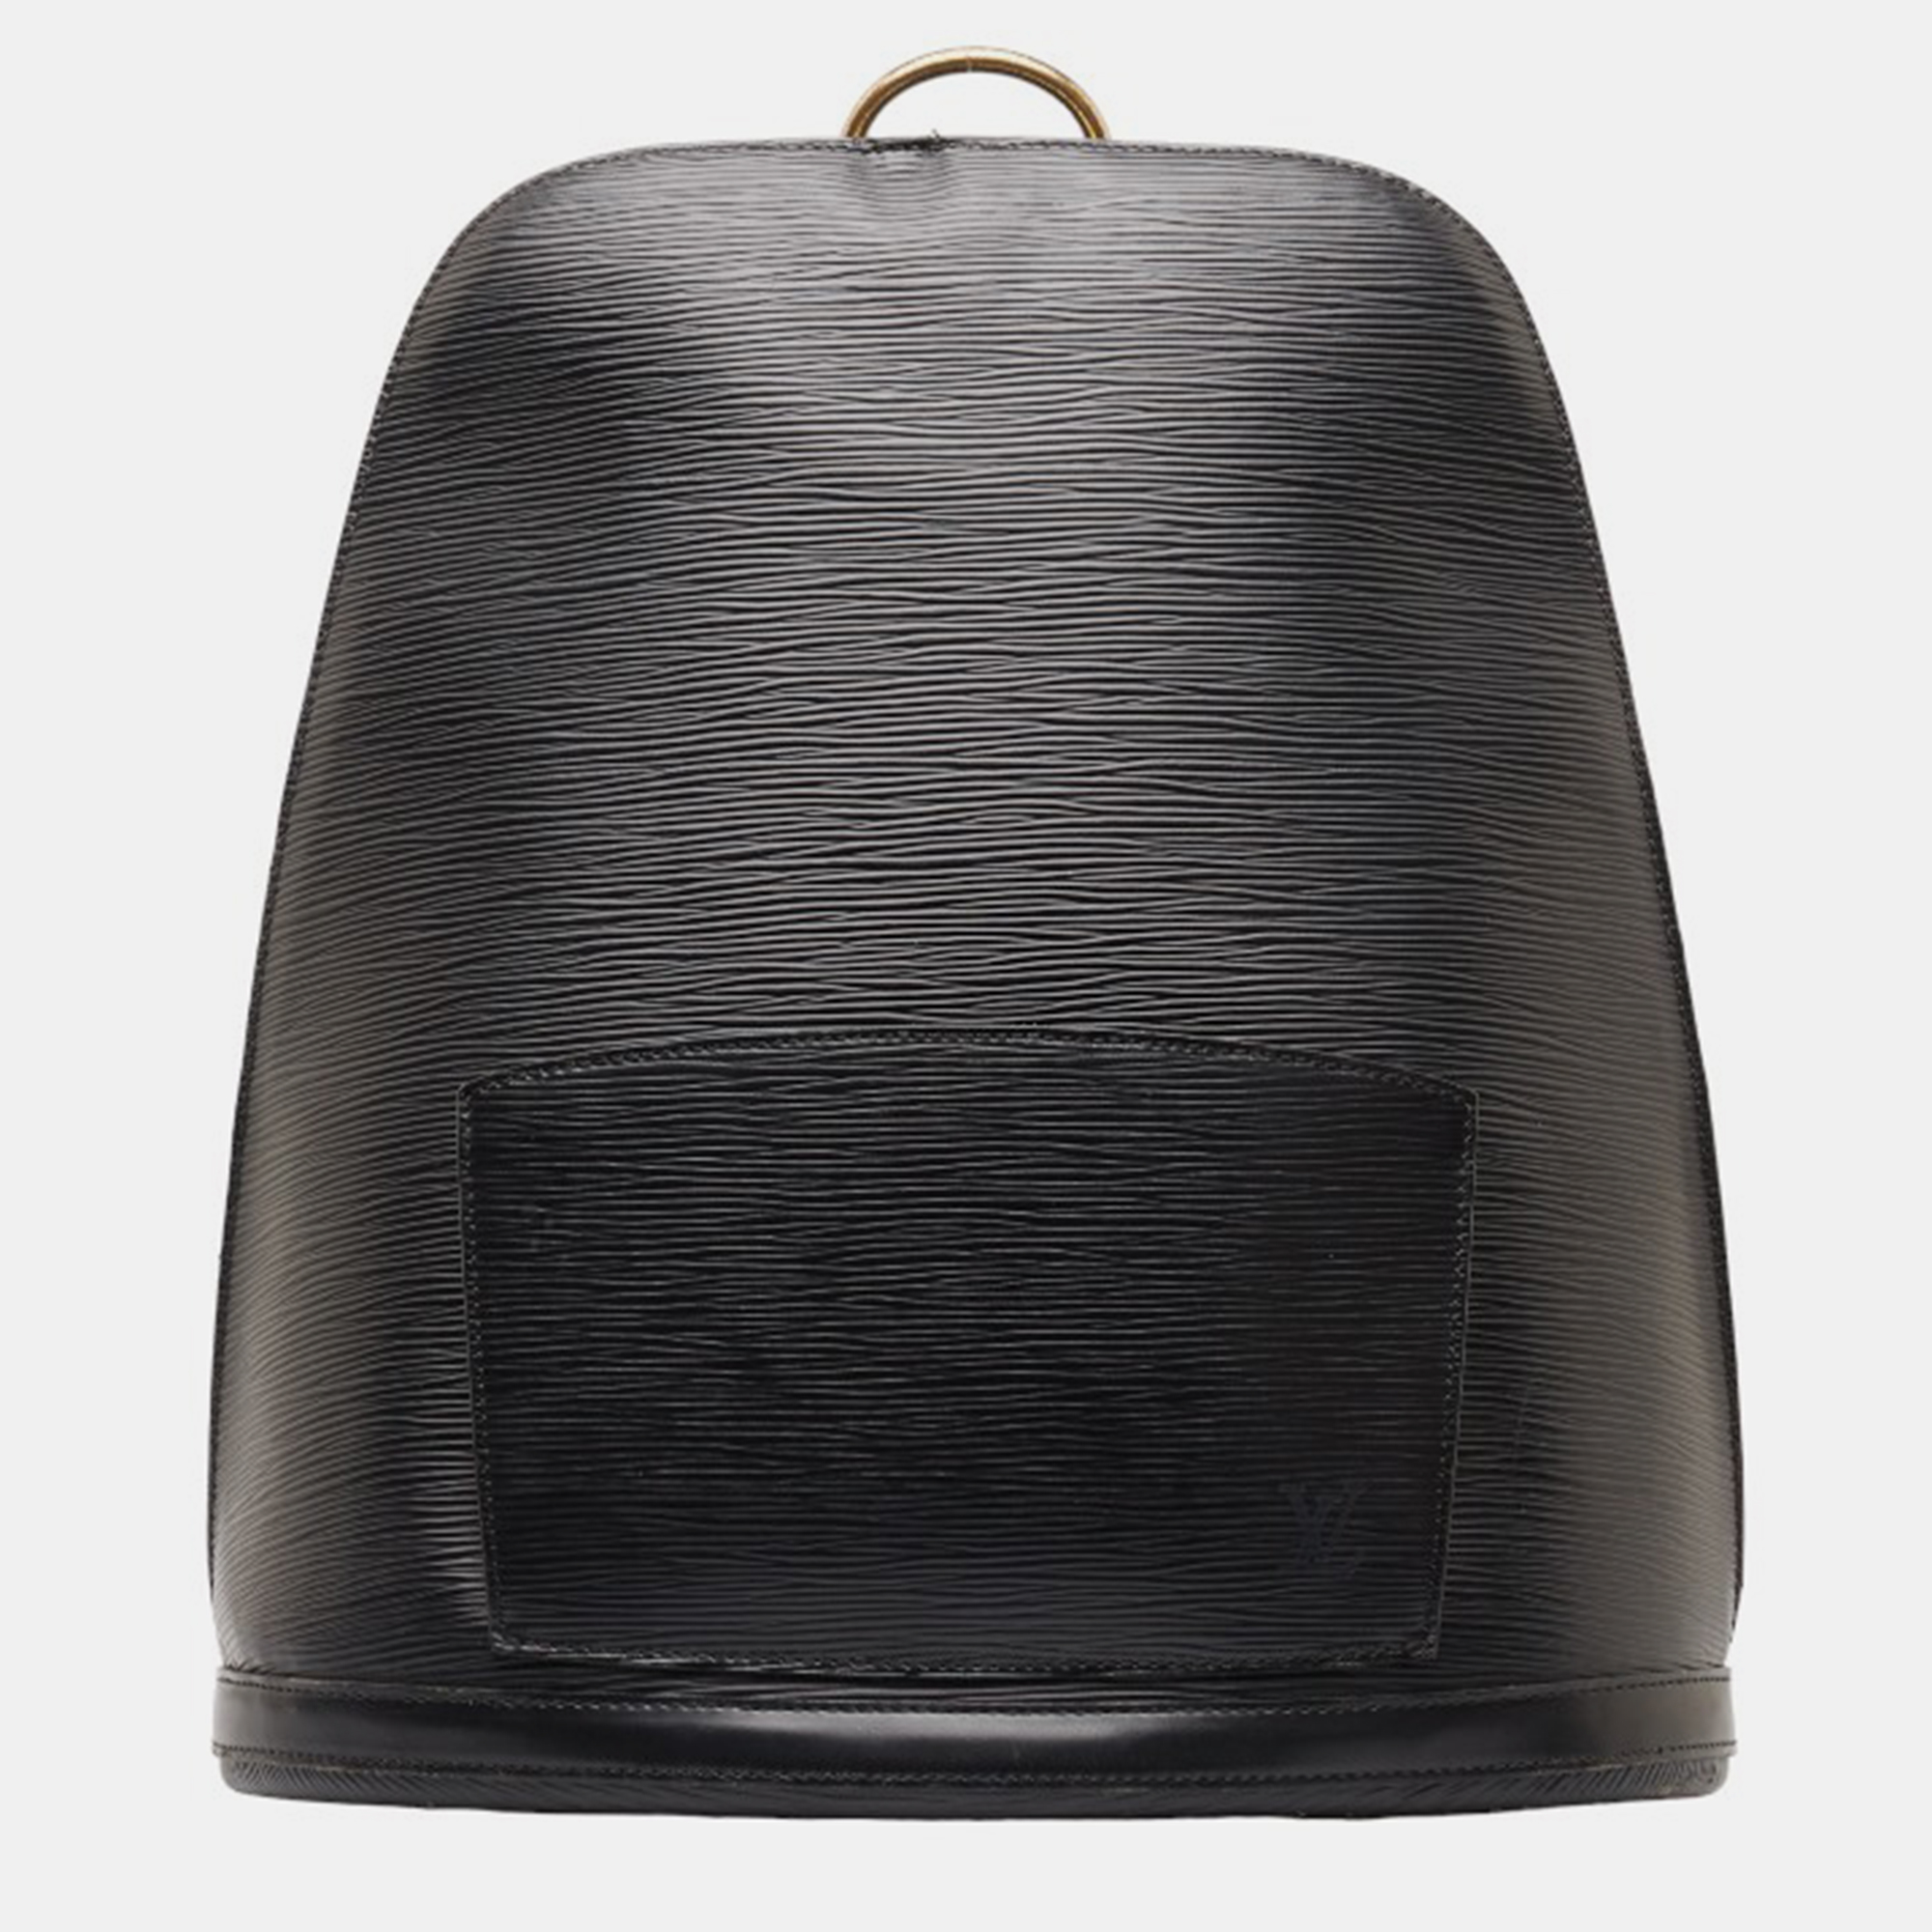 Pre-owned Louis Vuitton Black Leather Gobelins Backpack